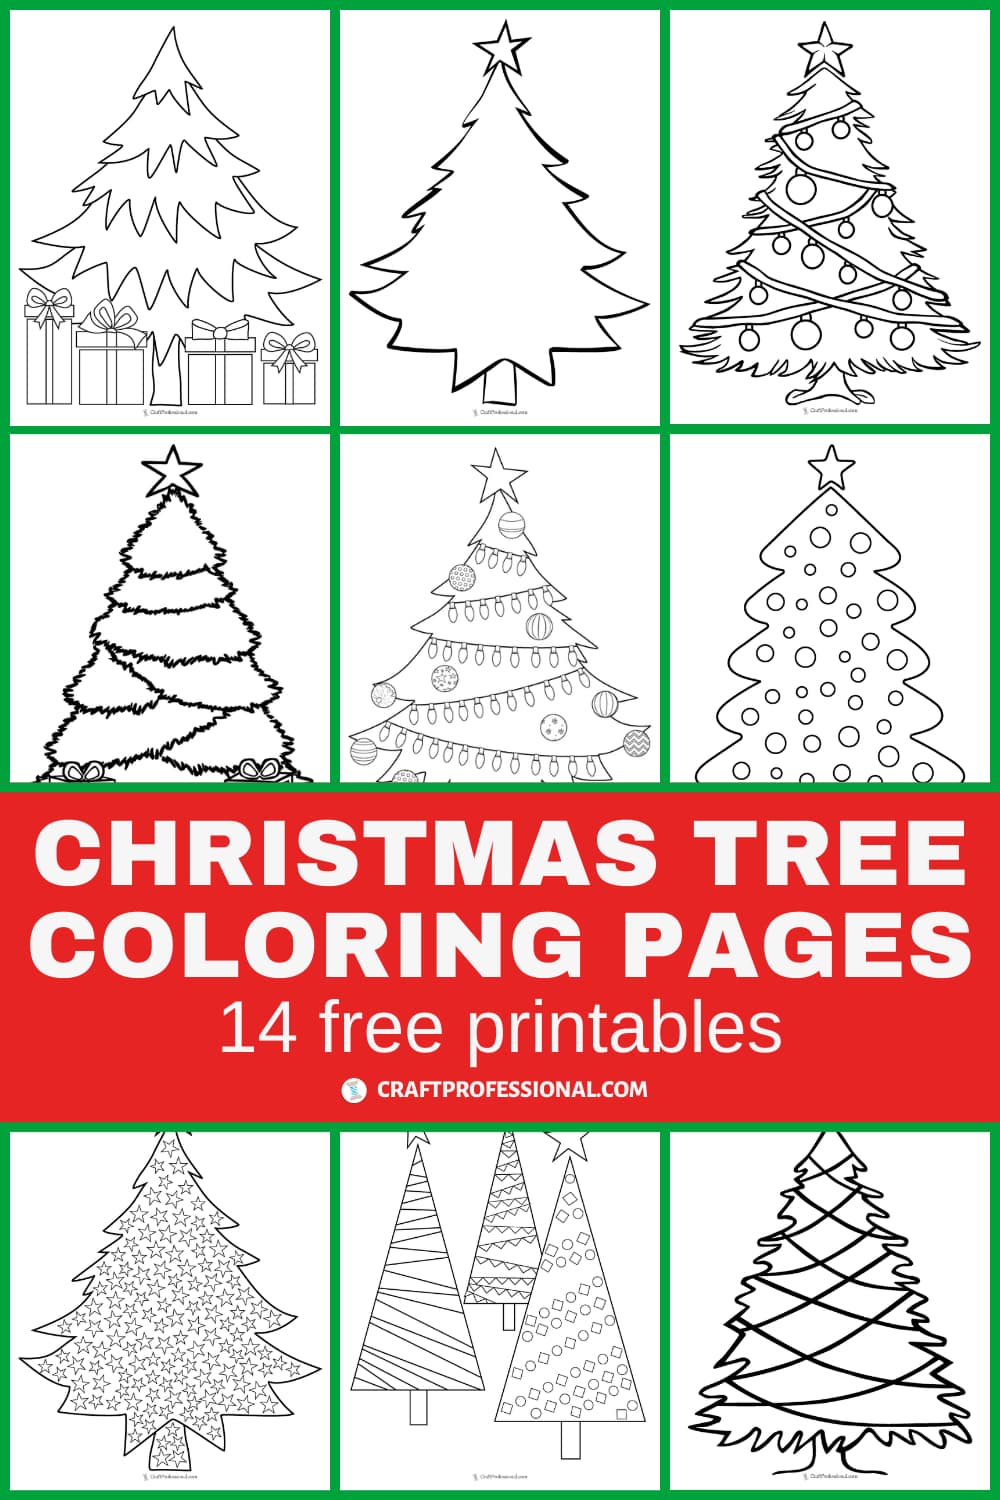 14 Printable Christmas Tree Coloring Pages